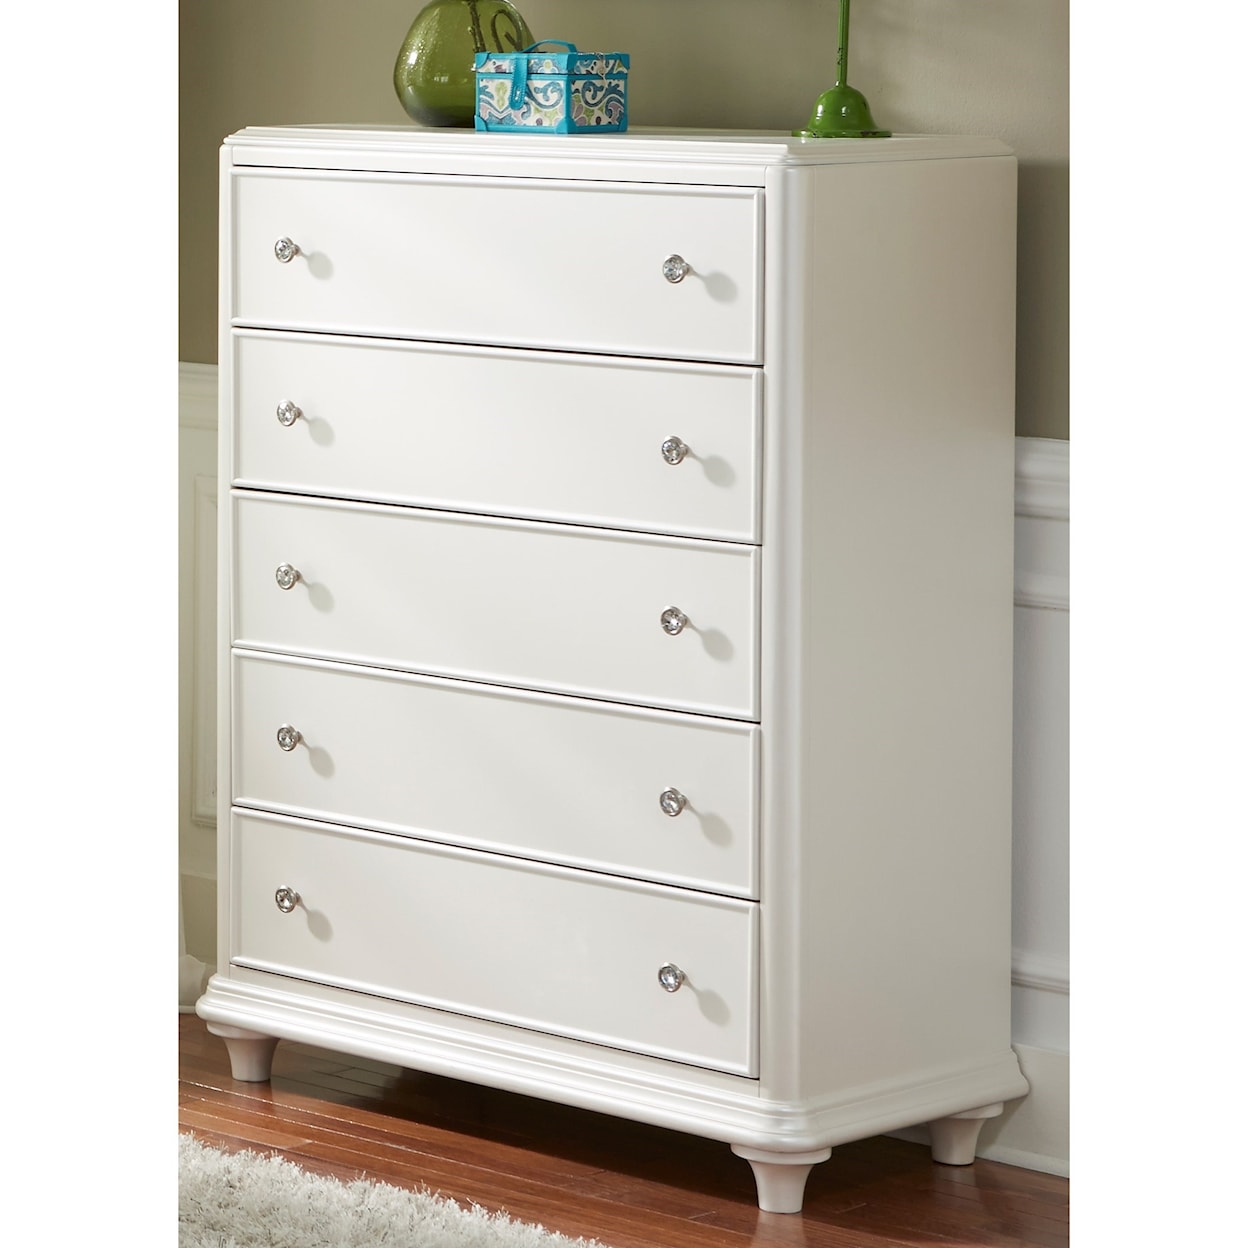 Libby Stardust 5-Drawer Chest